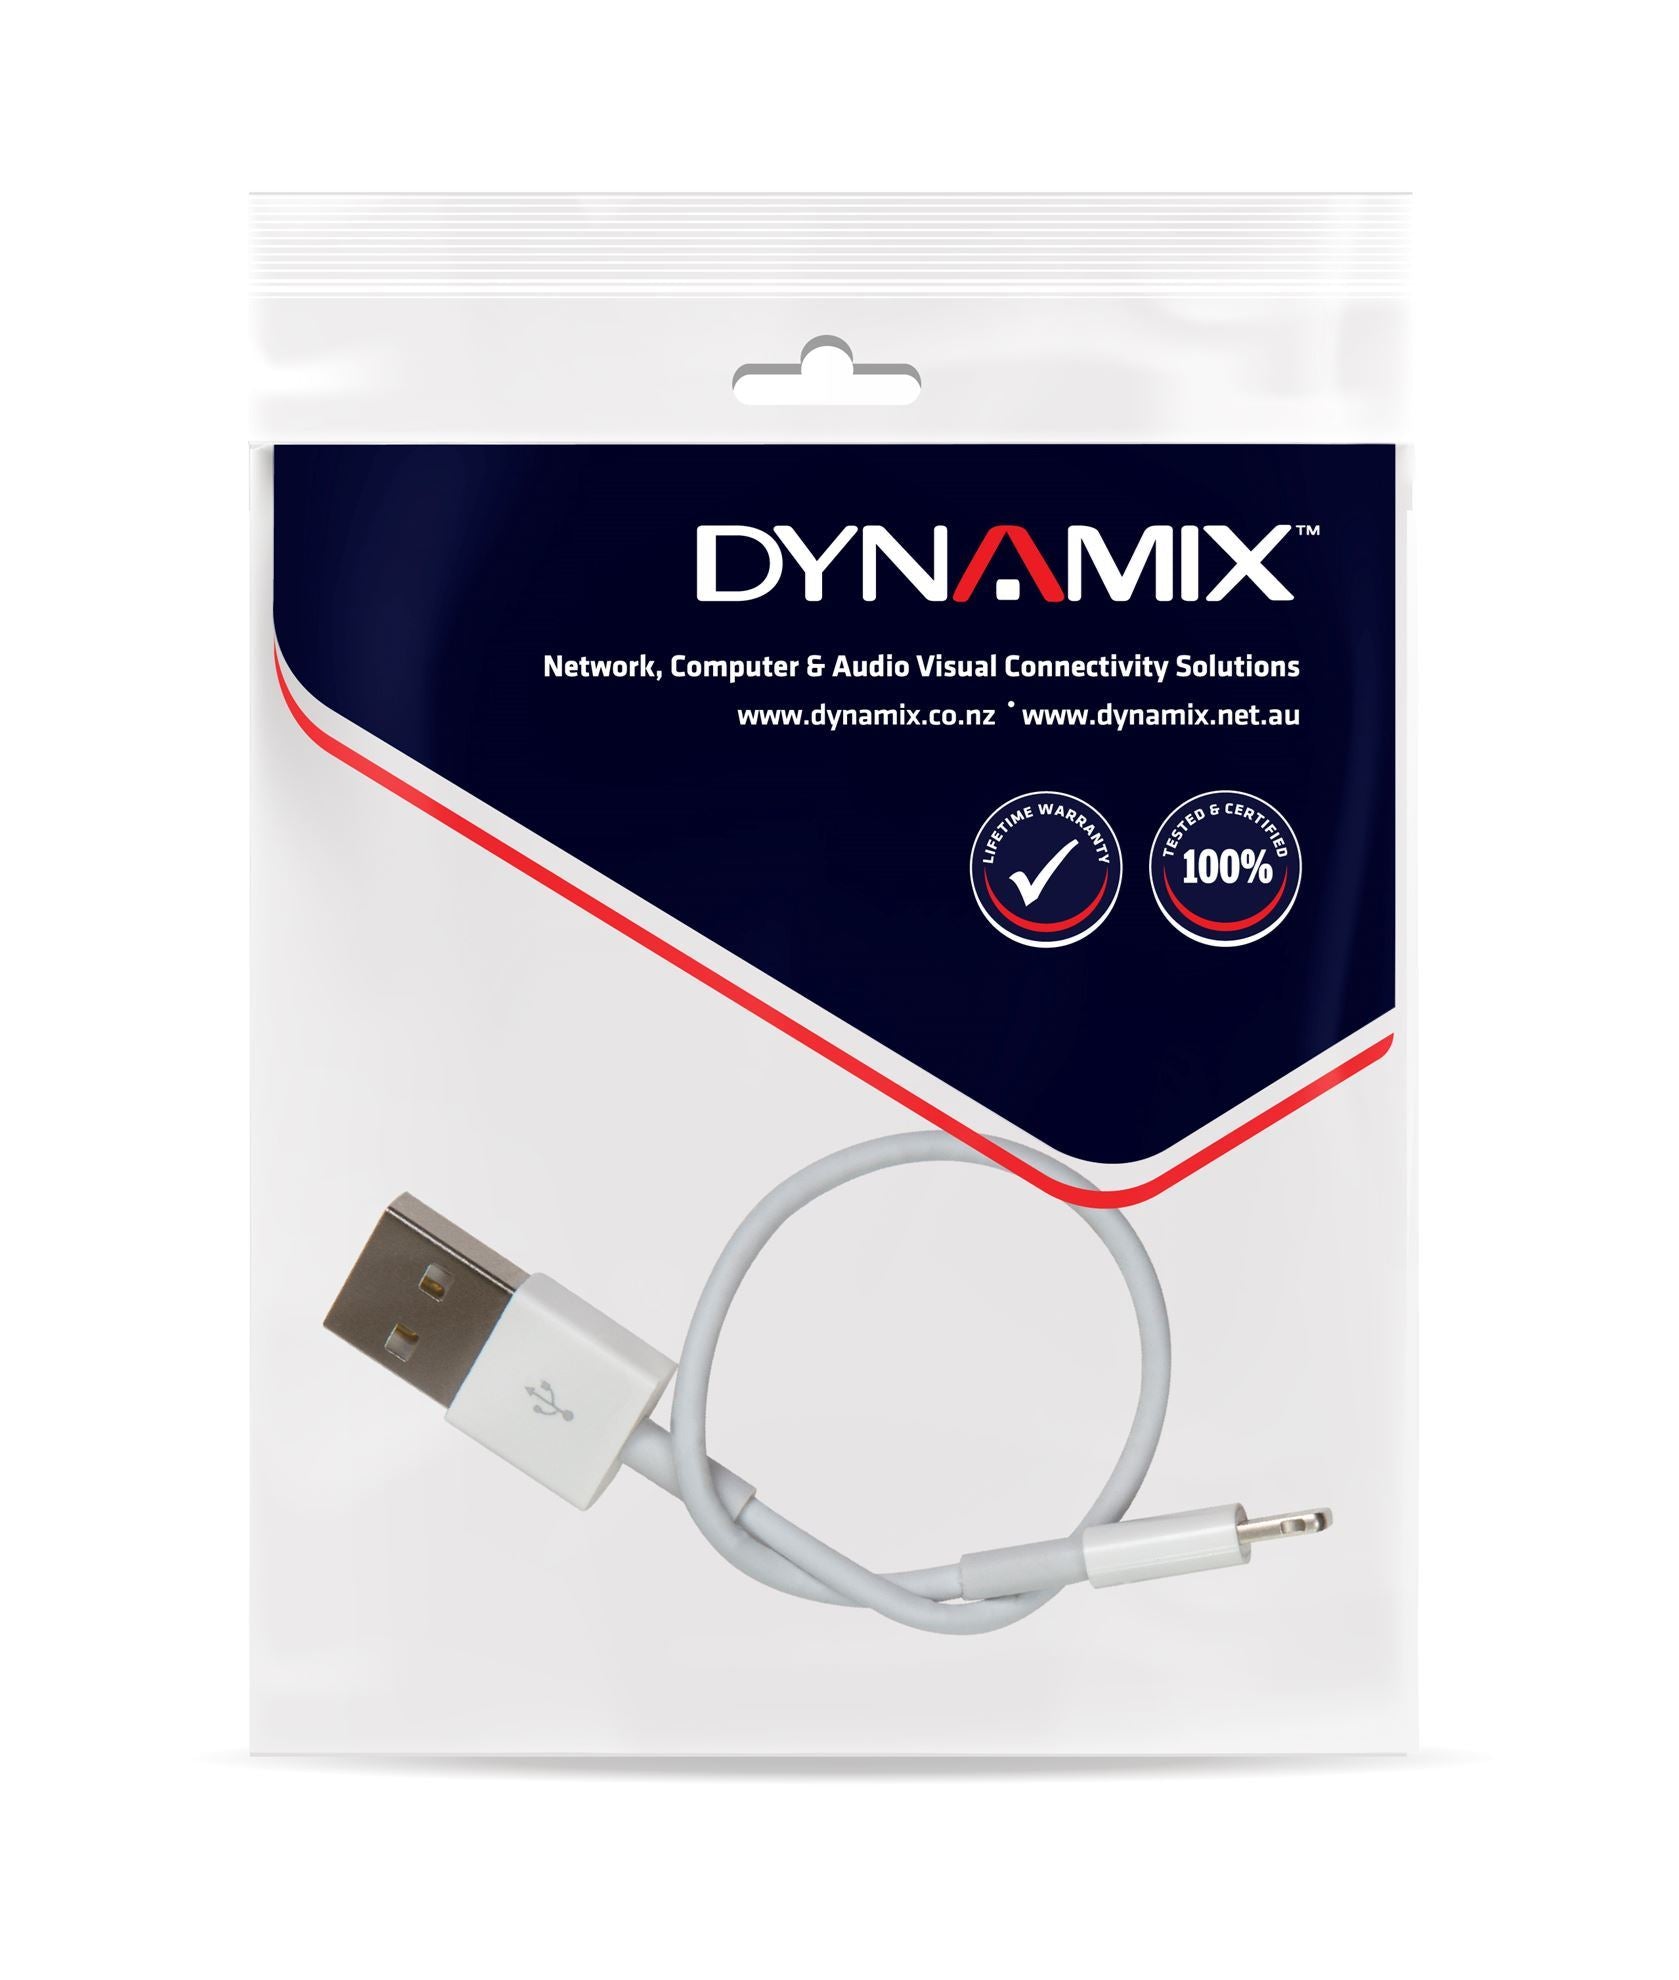 DYNAMIX_1m_USB-A_to_Lightning_Charge_&_Sync_Cable._For_Apple_iPhone,_iPad,_iPad_mini_&_iPods_*Not_MFI_Certified* 927